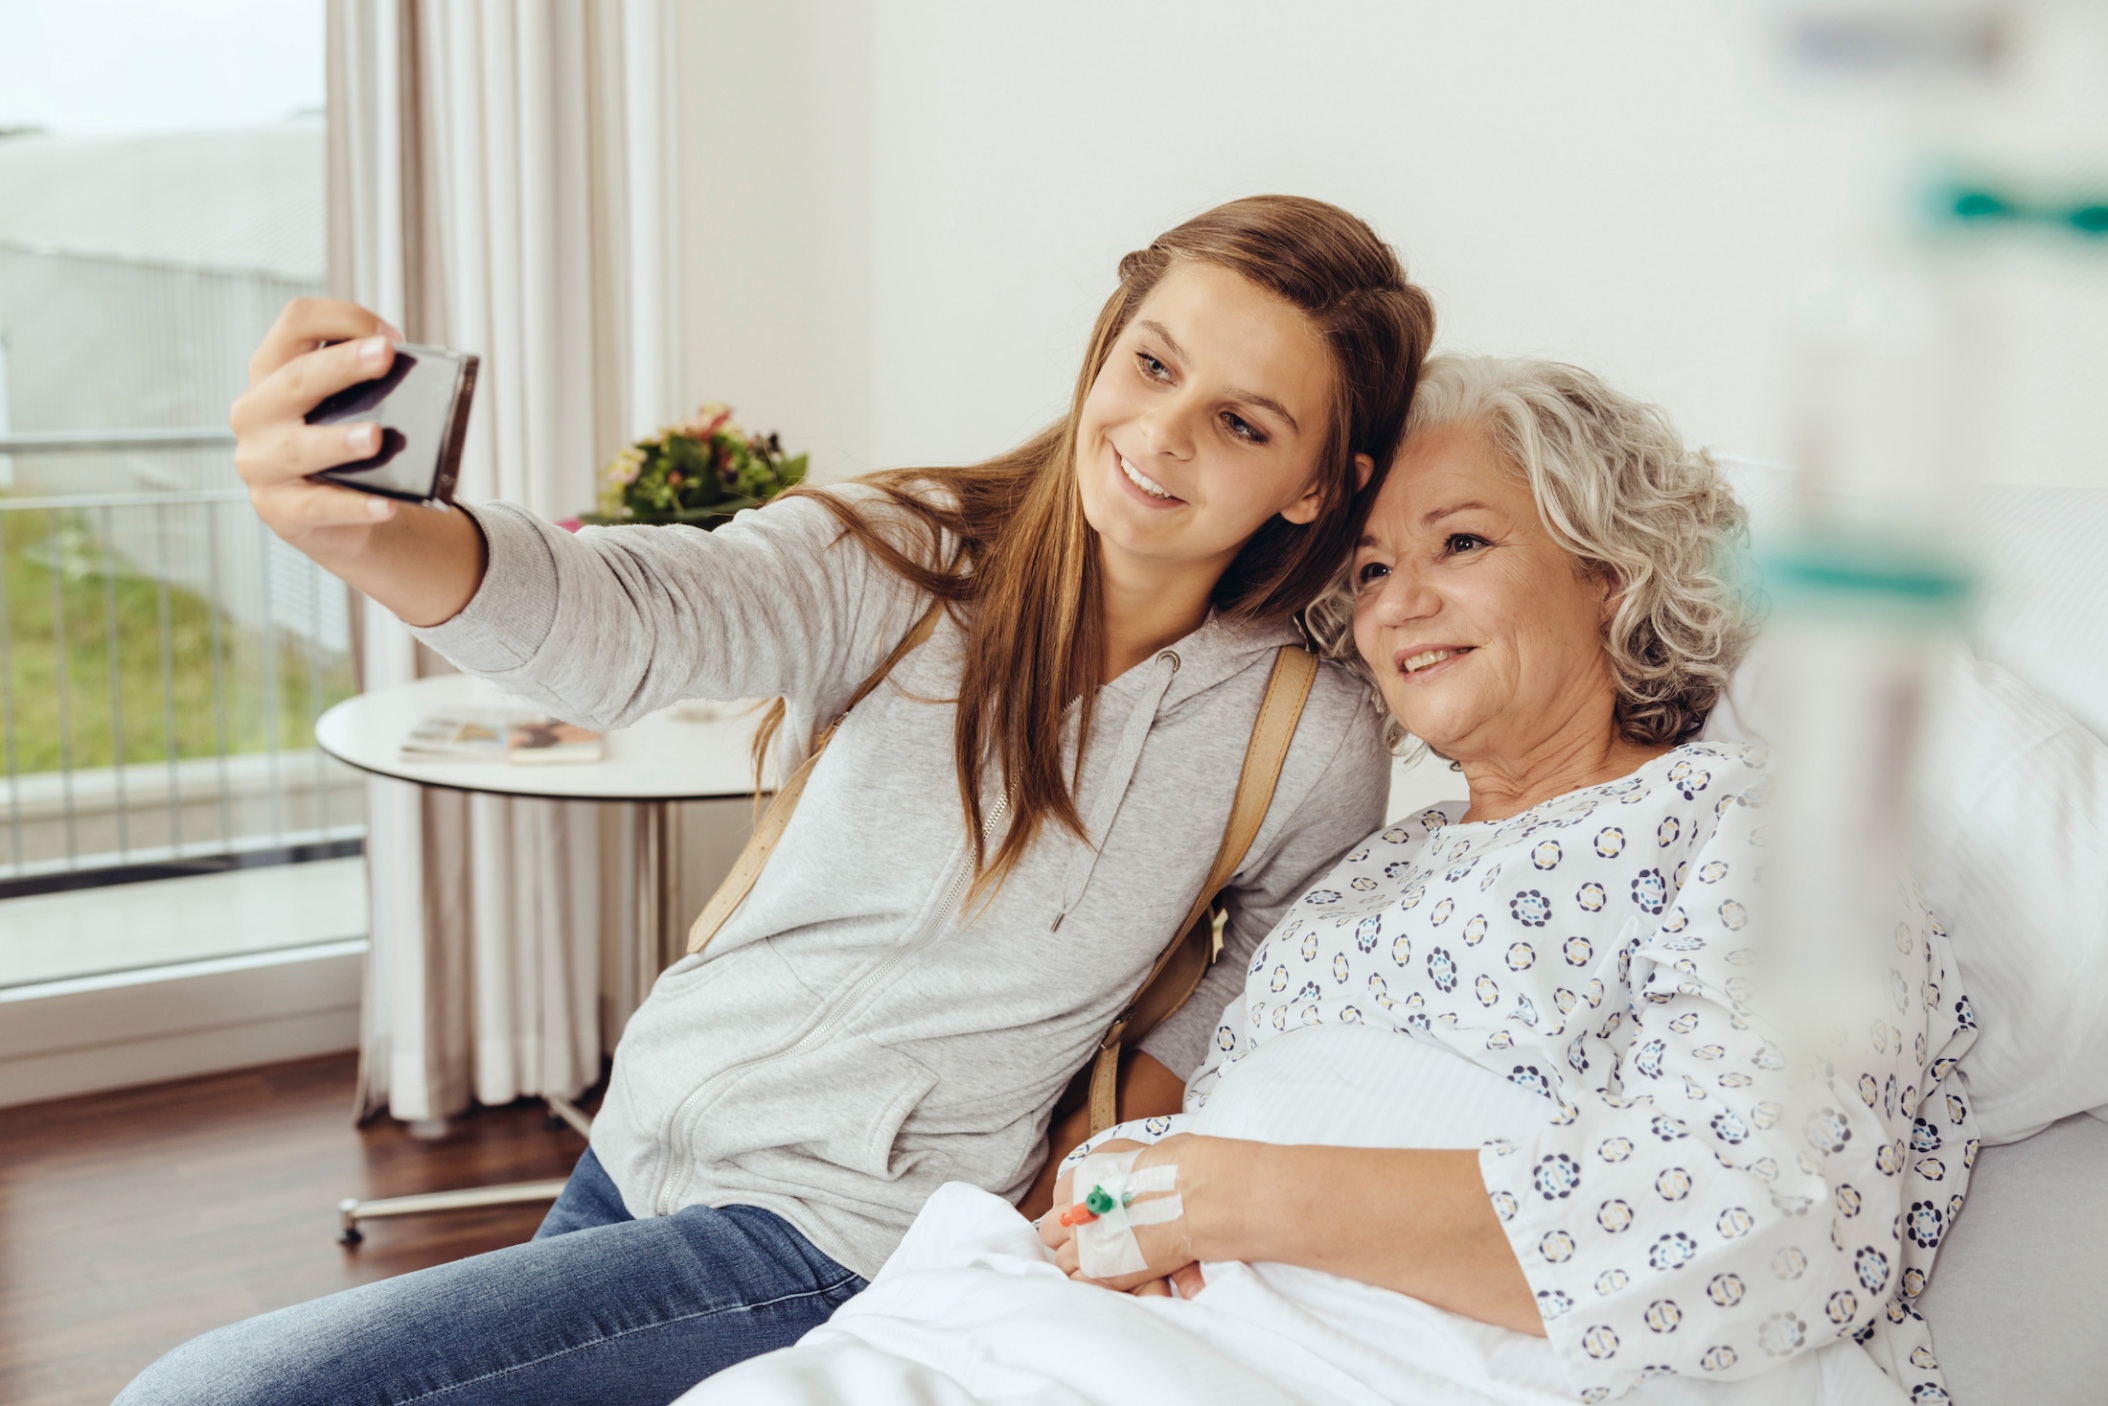 Young woman visiting her grandmother in hospital, taking a selfie or videochatting